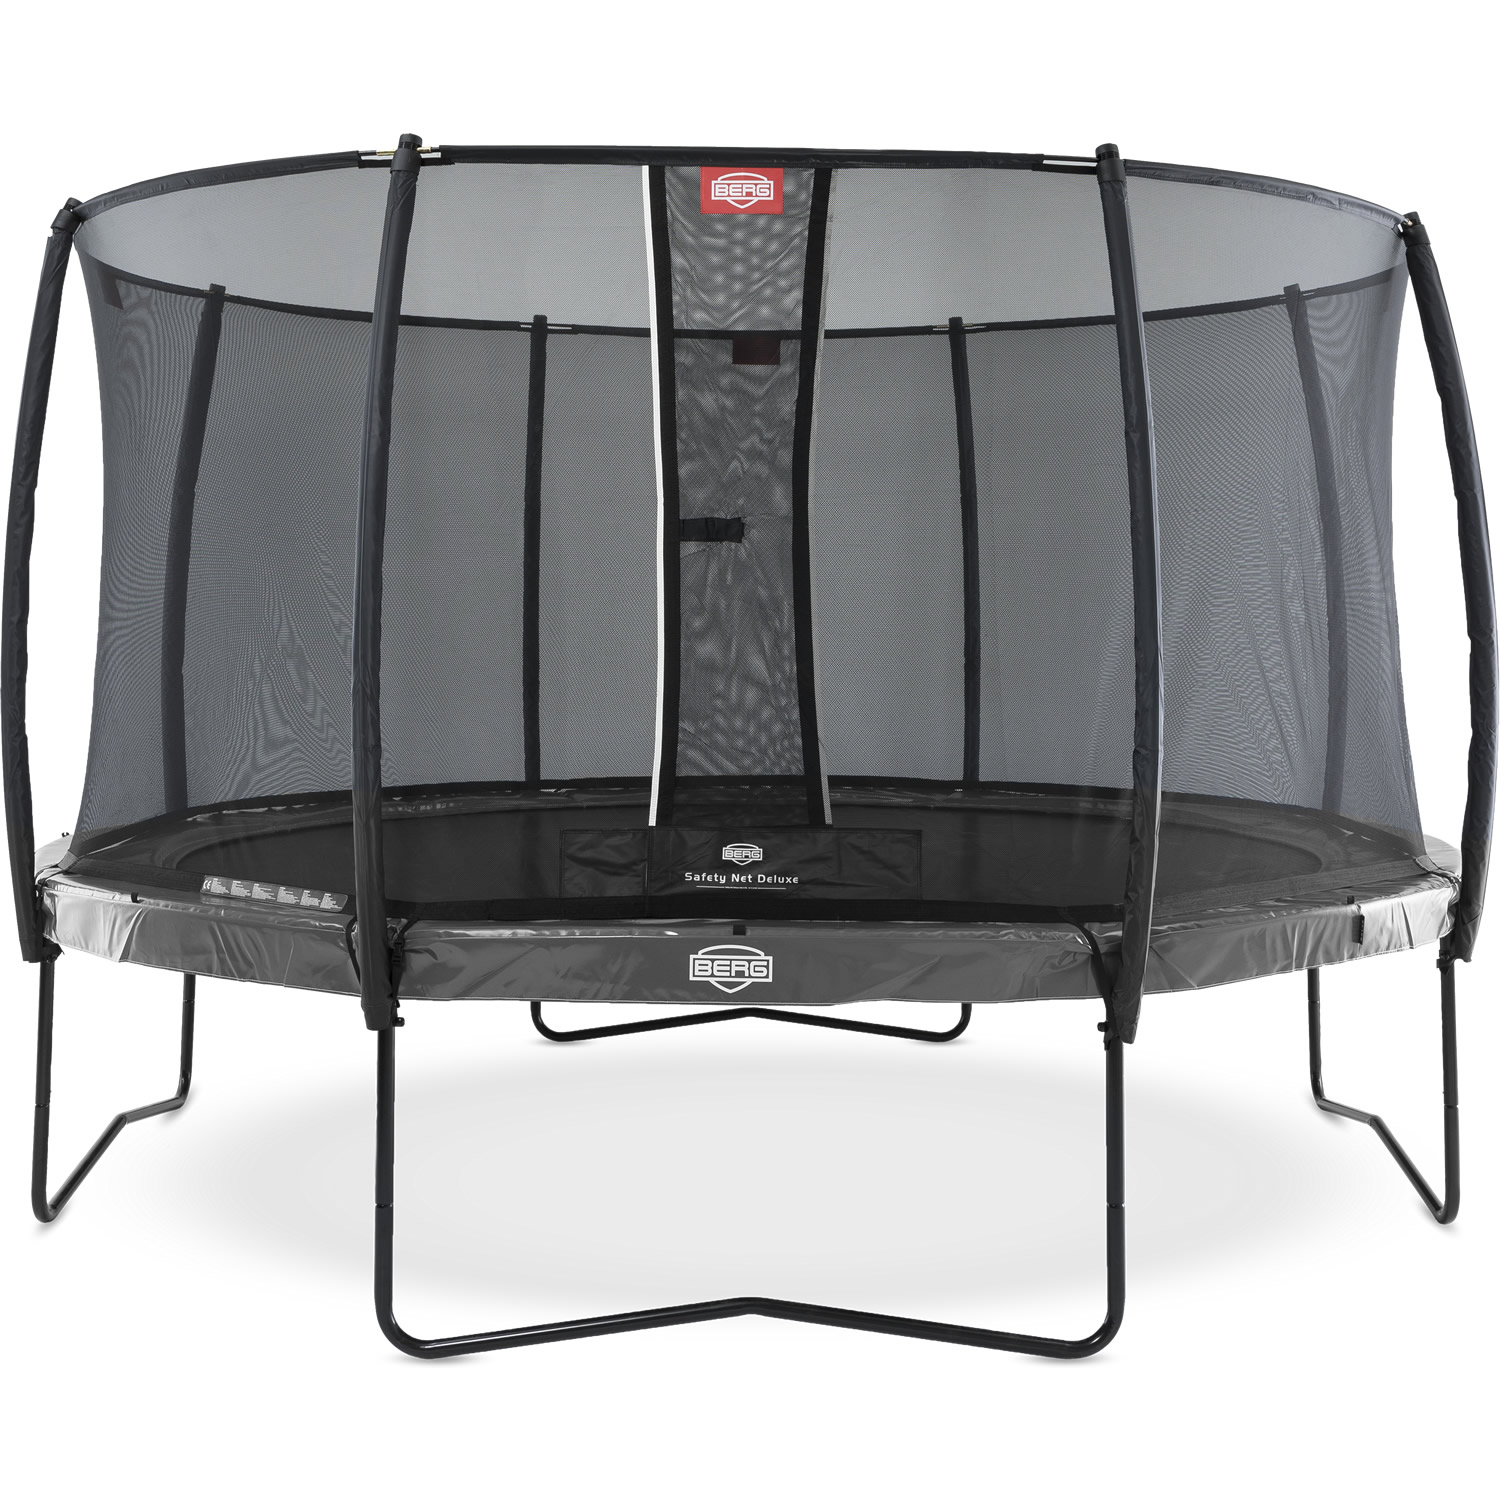 Lily Velkommen invadere Berg Elite 430 Grey incl. Safety Net Deluxe - Best quality, biggest choice